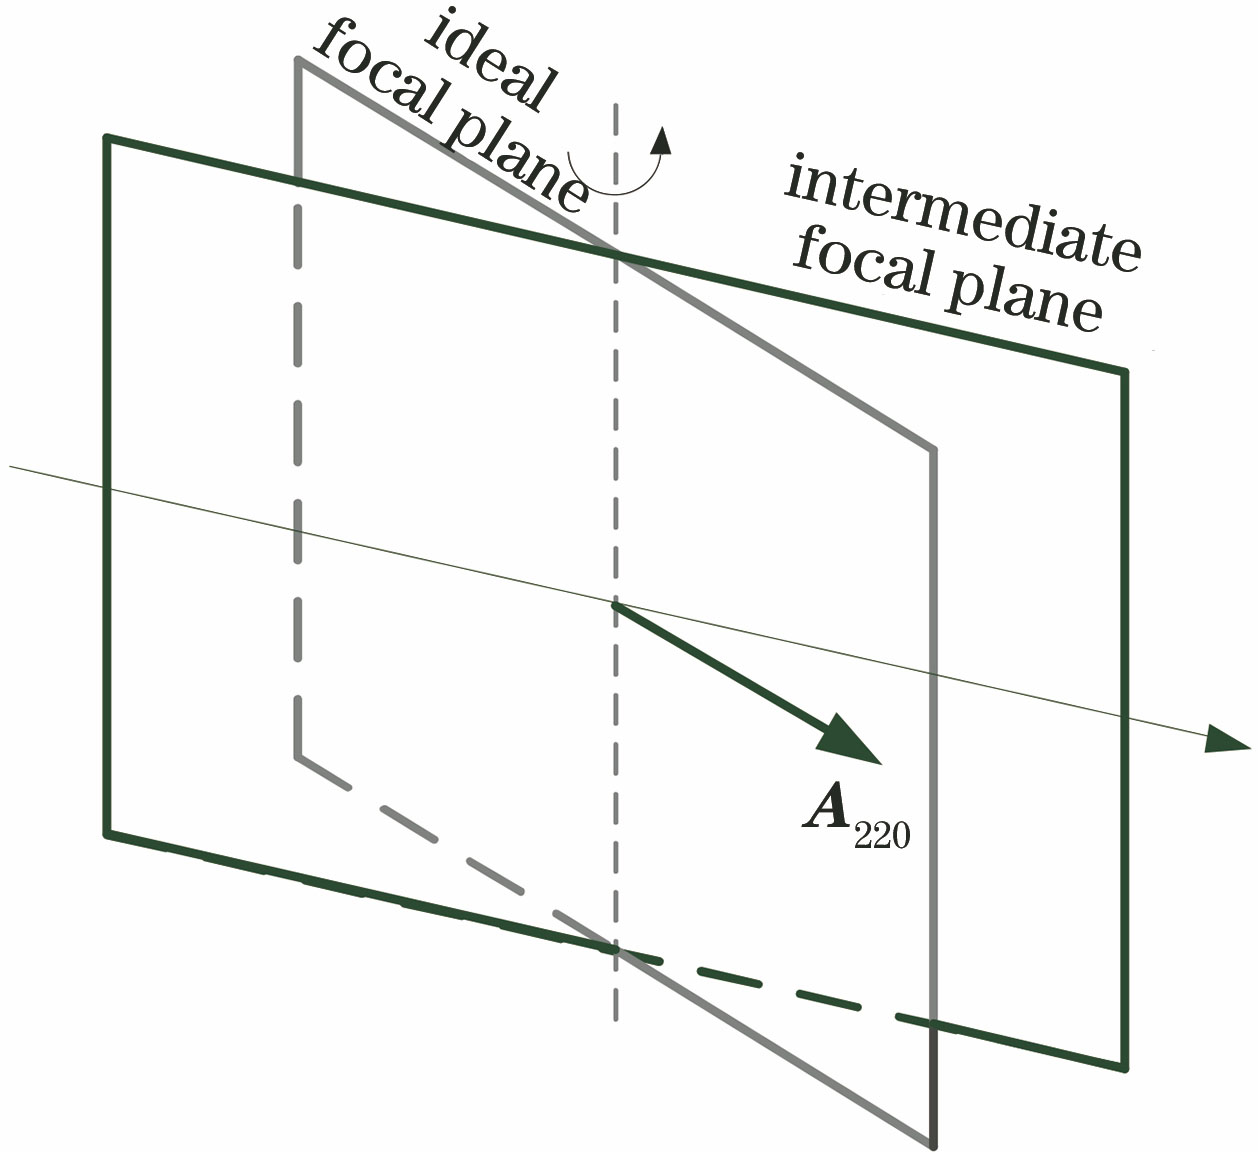 Focal plane tilt caused by misalignment of plane-field optical system